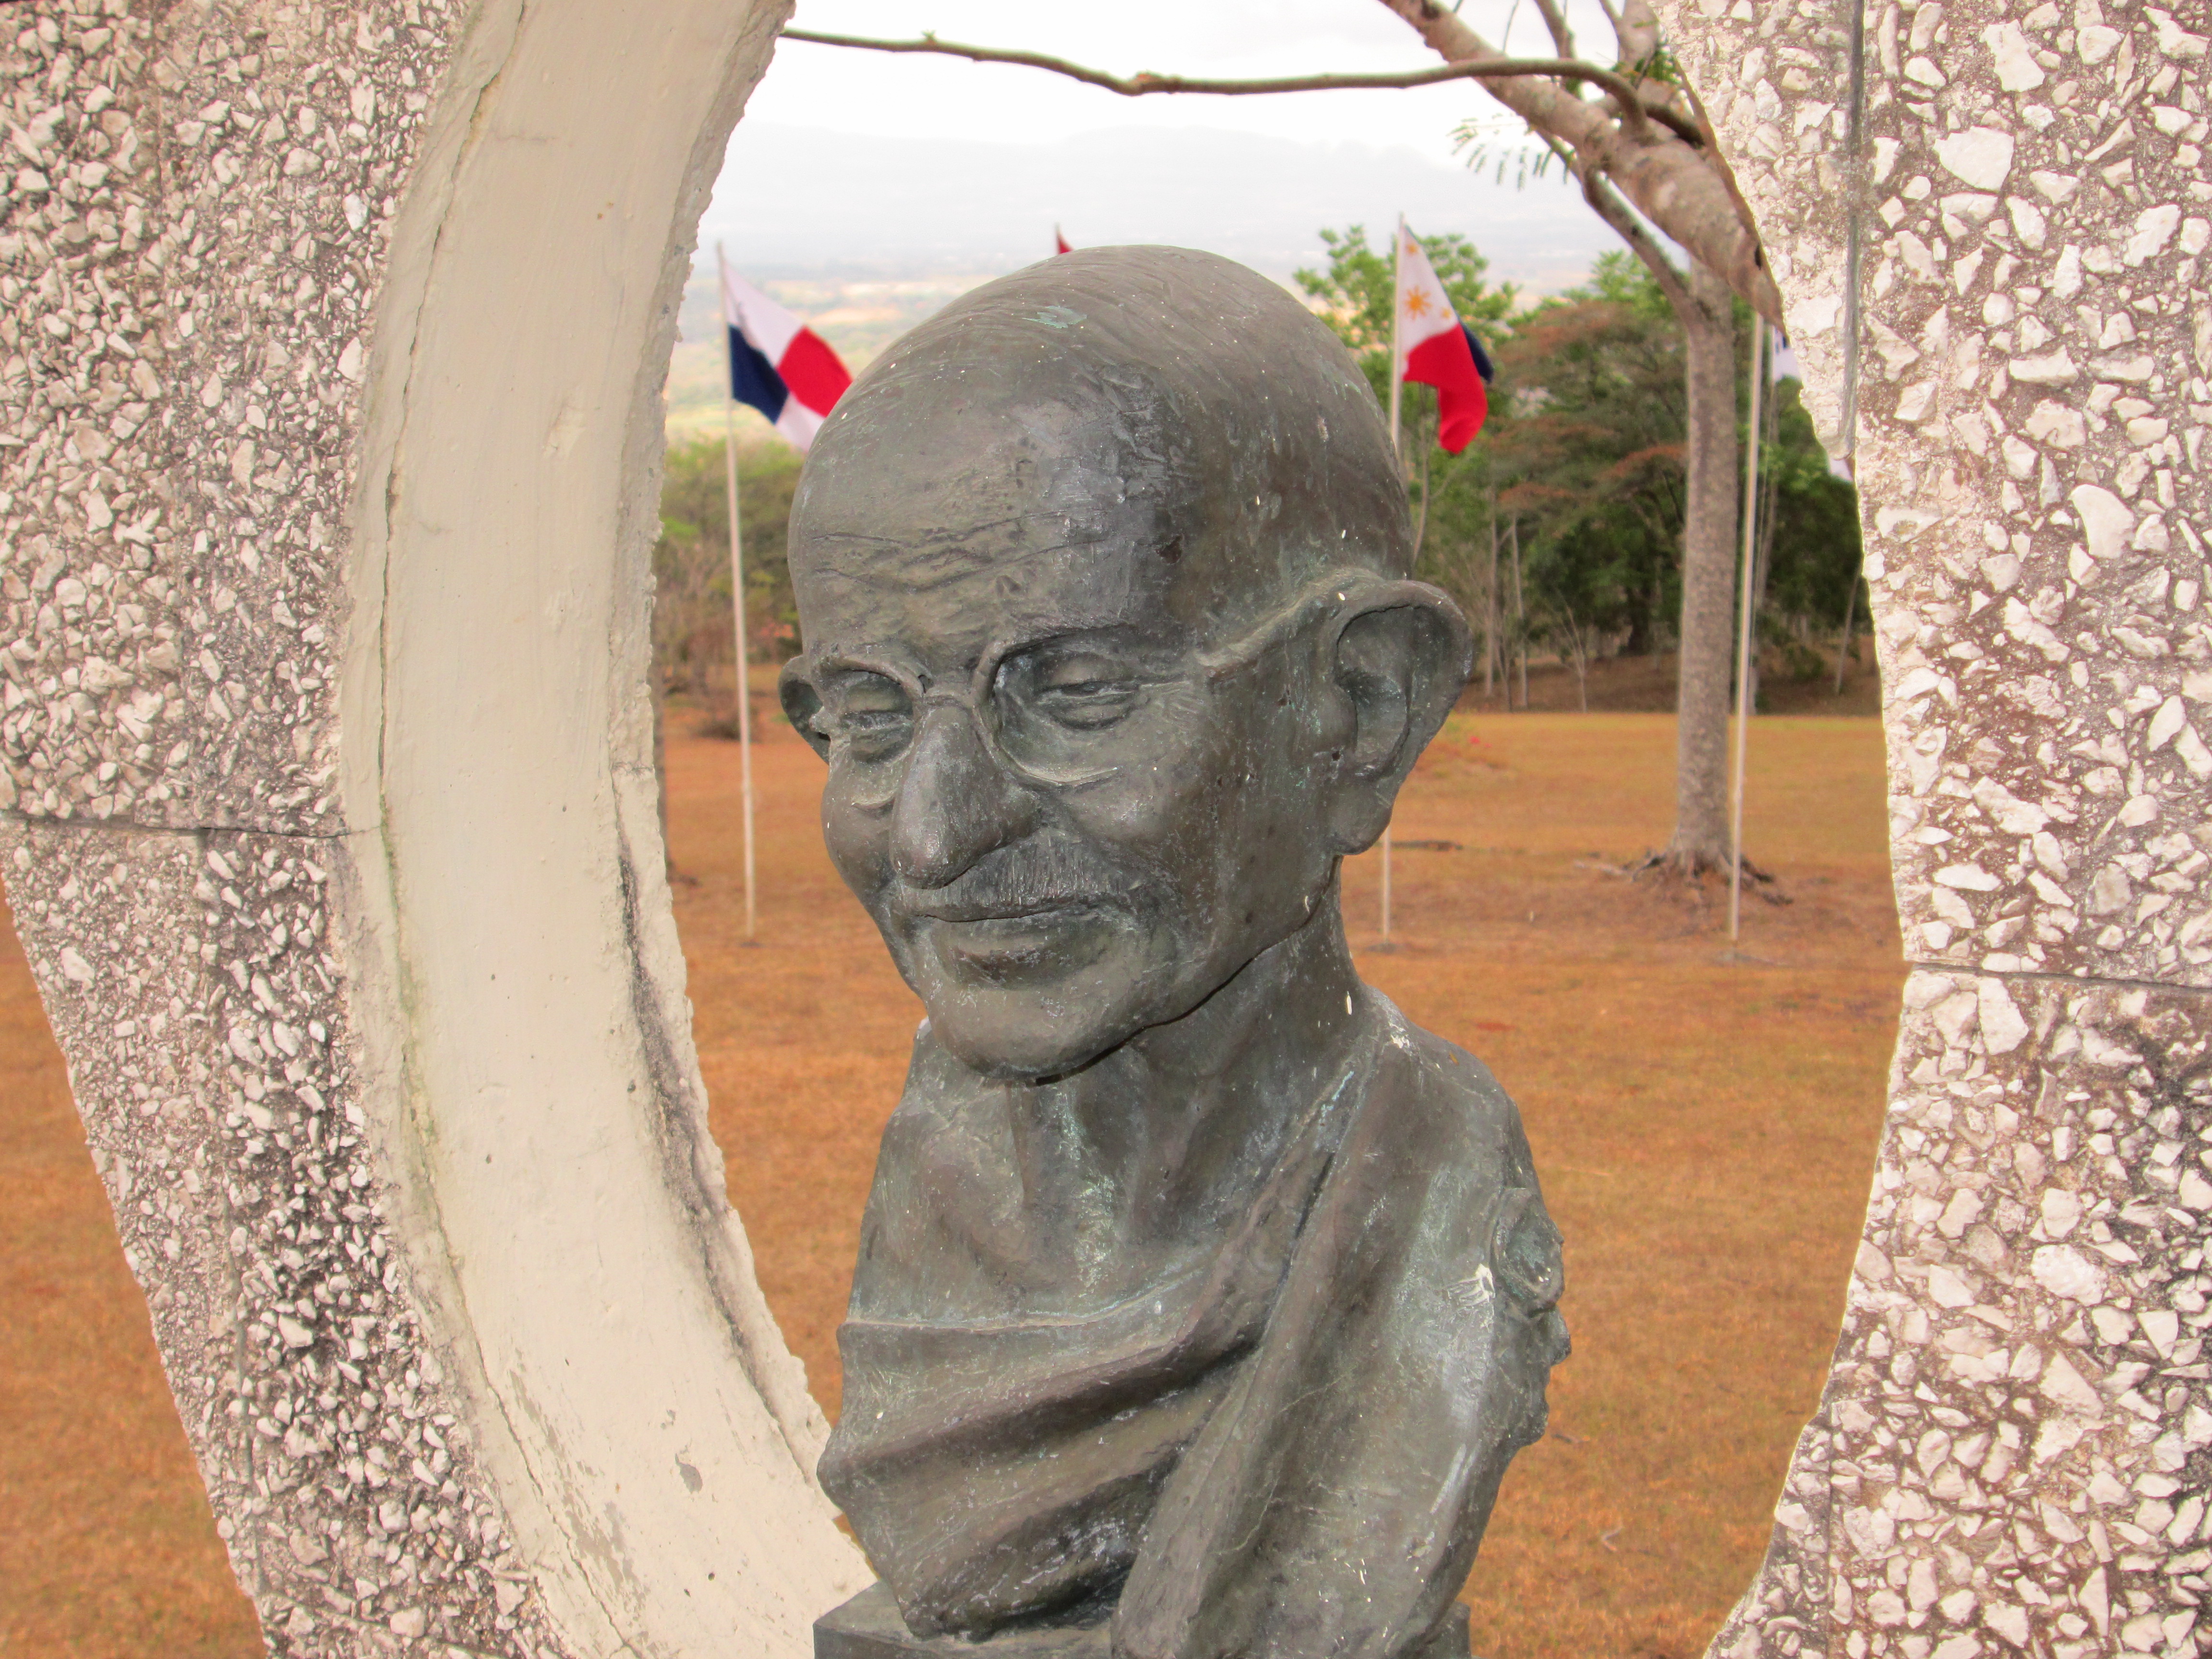 A statue of Mahatma Gandhi at the UN University for Peace in Costa Rica, where 13 students and two faculty from Pace University participated in a Model UN conference focused on peace issues in March.